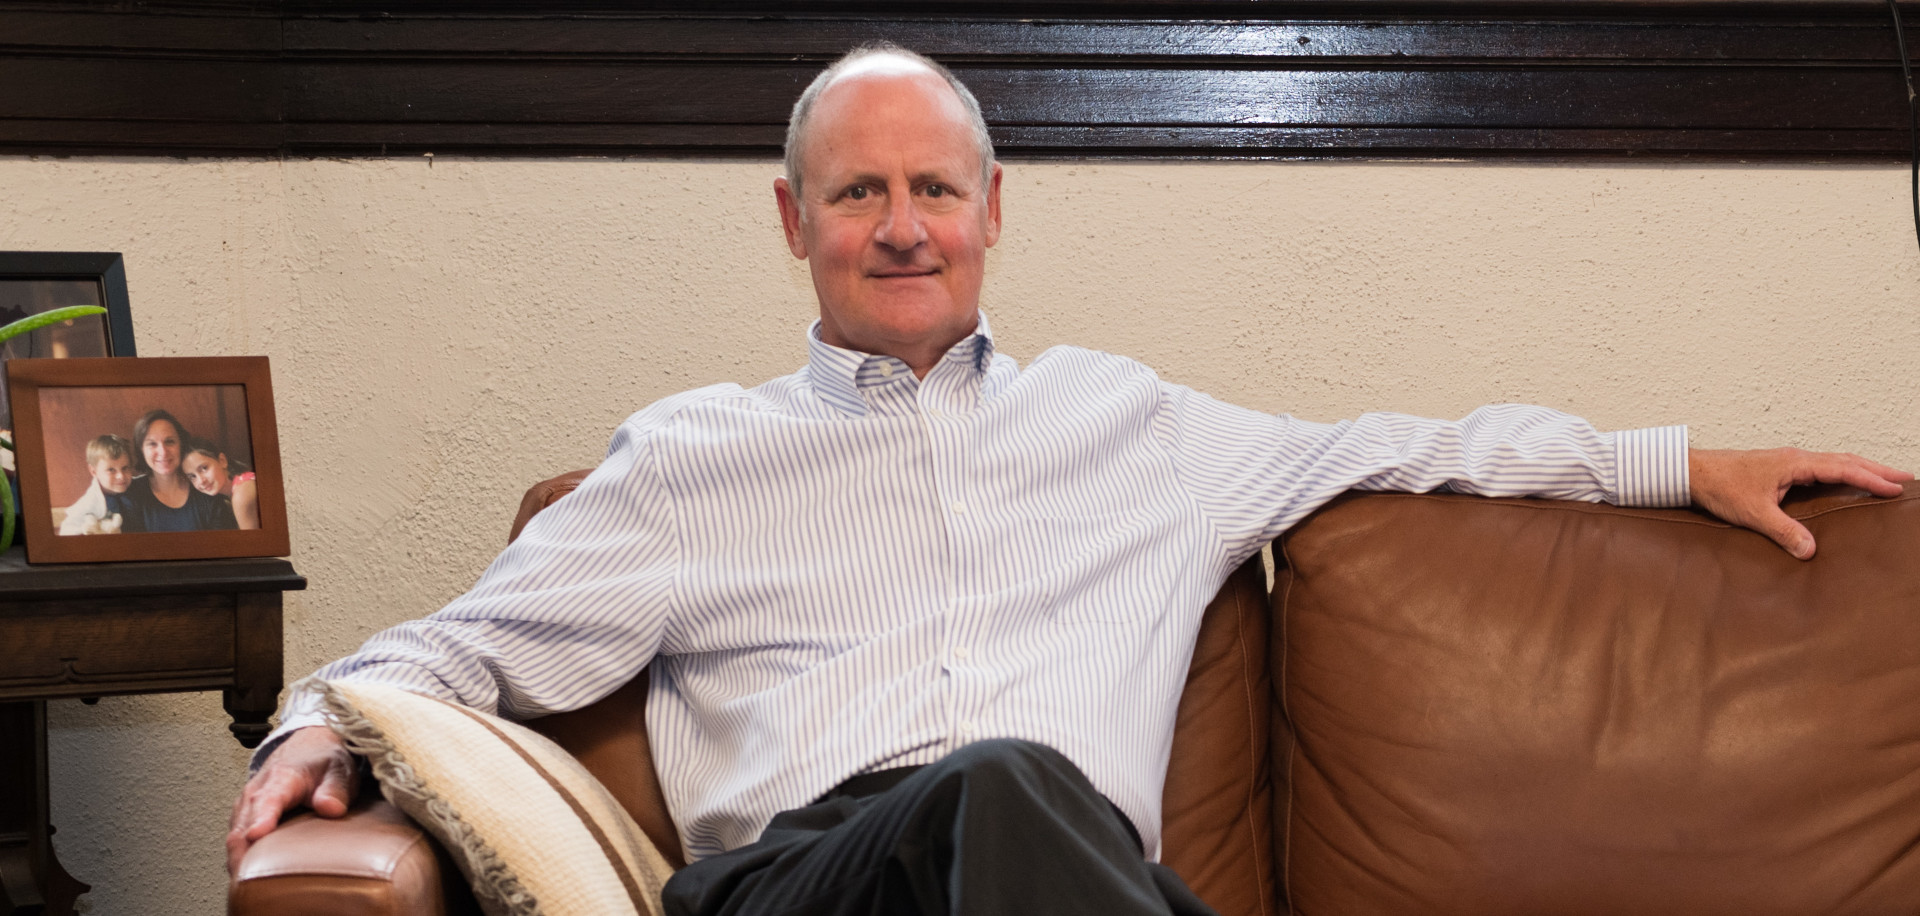 A smiling Rev. Dr. Ken Baily sitting comfortably on a brown leather couch with his arm extended, wearing a striped button-up shirt and dark pants, with a framed photo on a side table beside him.